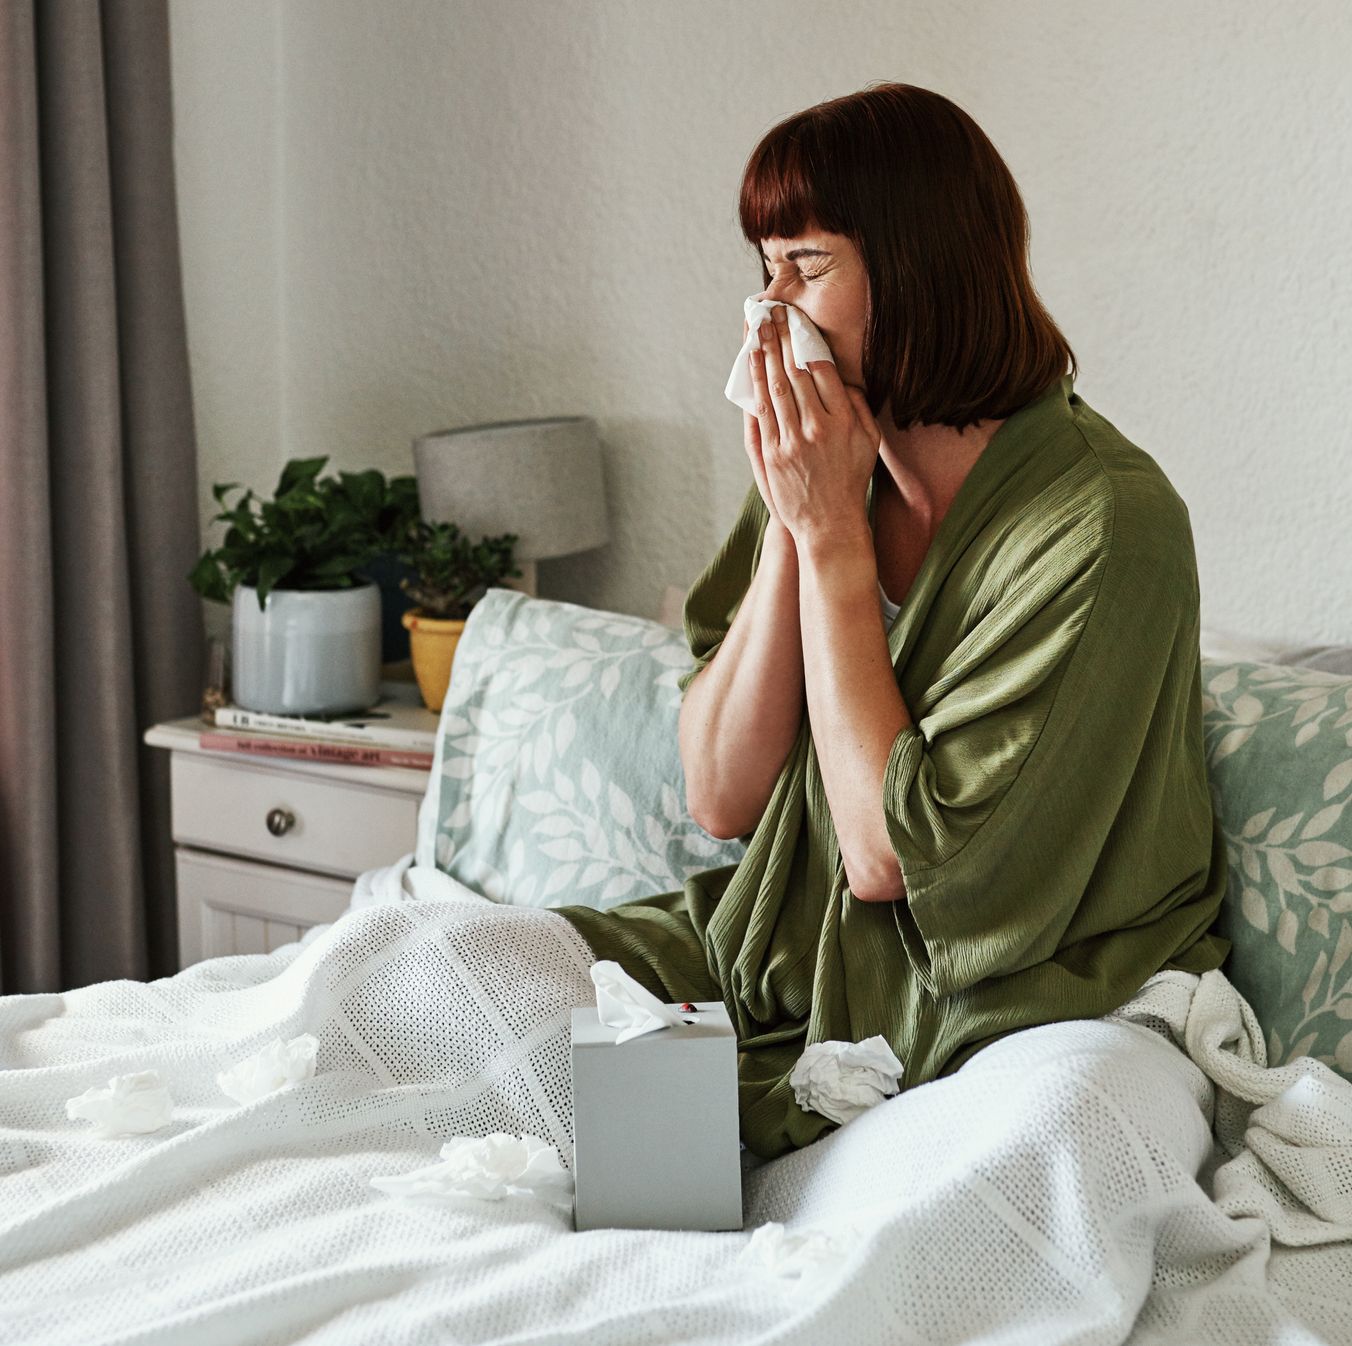 woman sneezing in bed with tissues